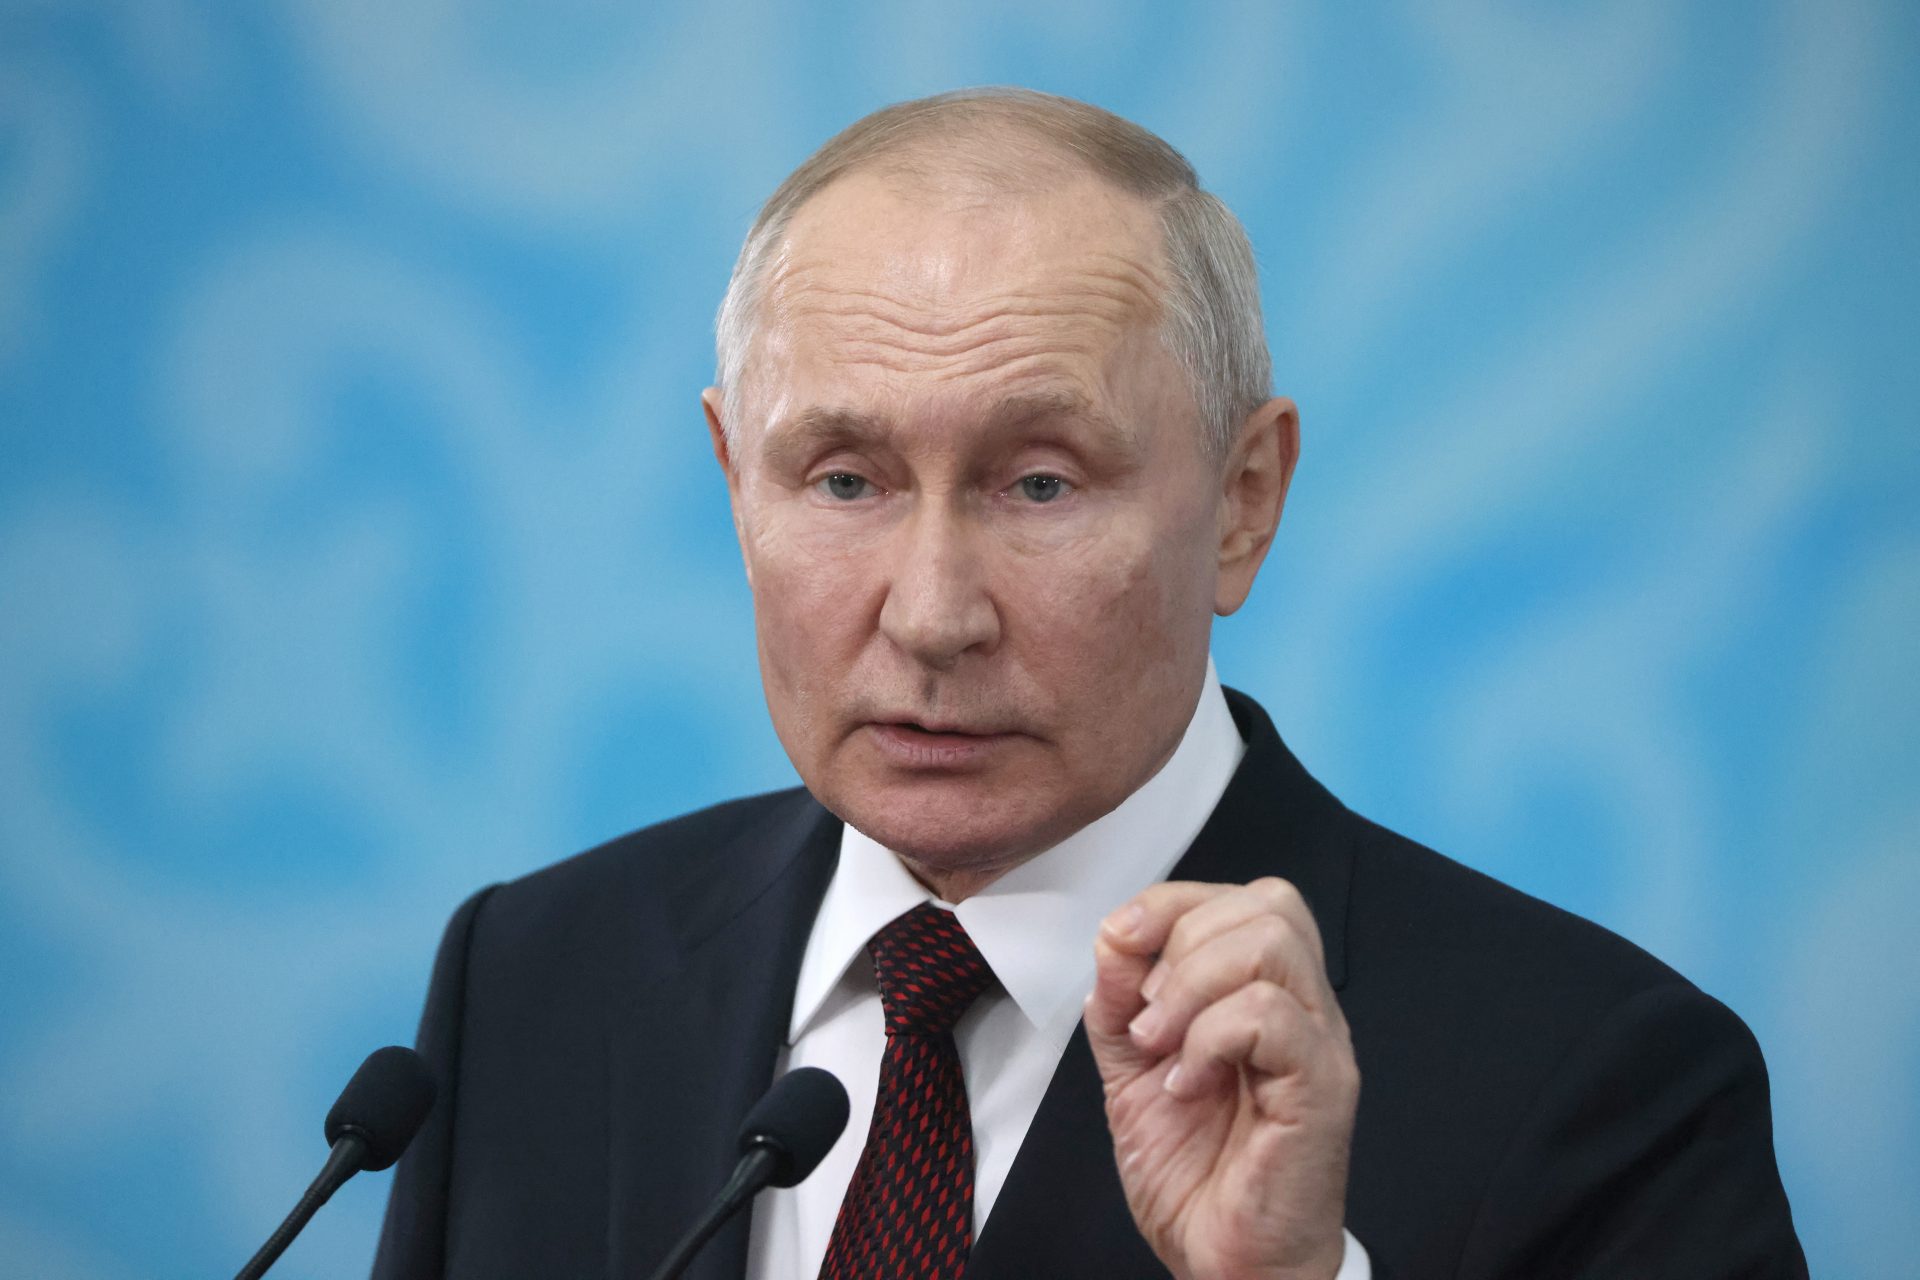 Putin has vowed that he will achieve his goals 